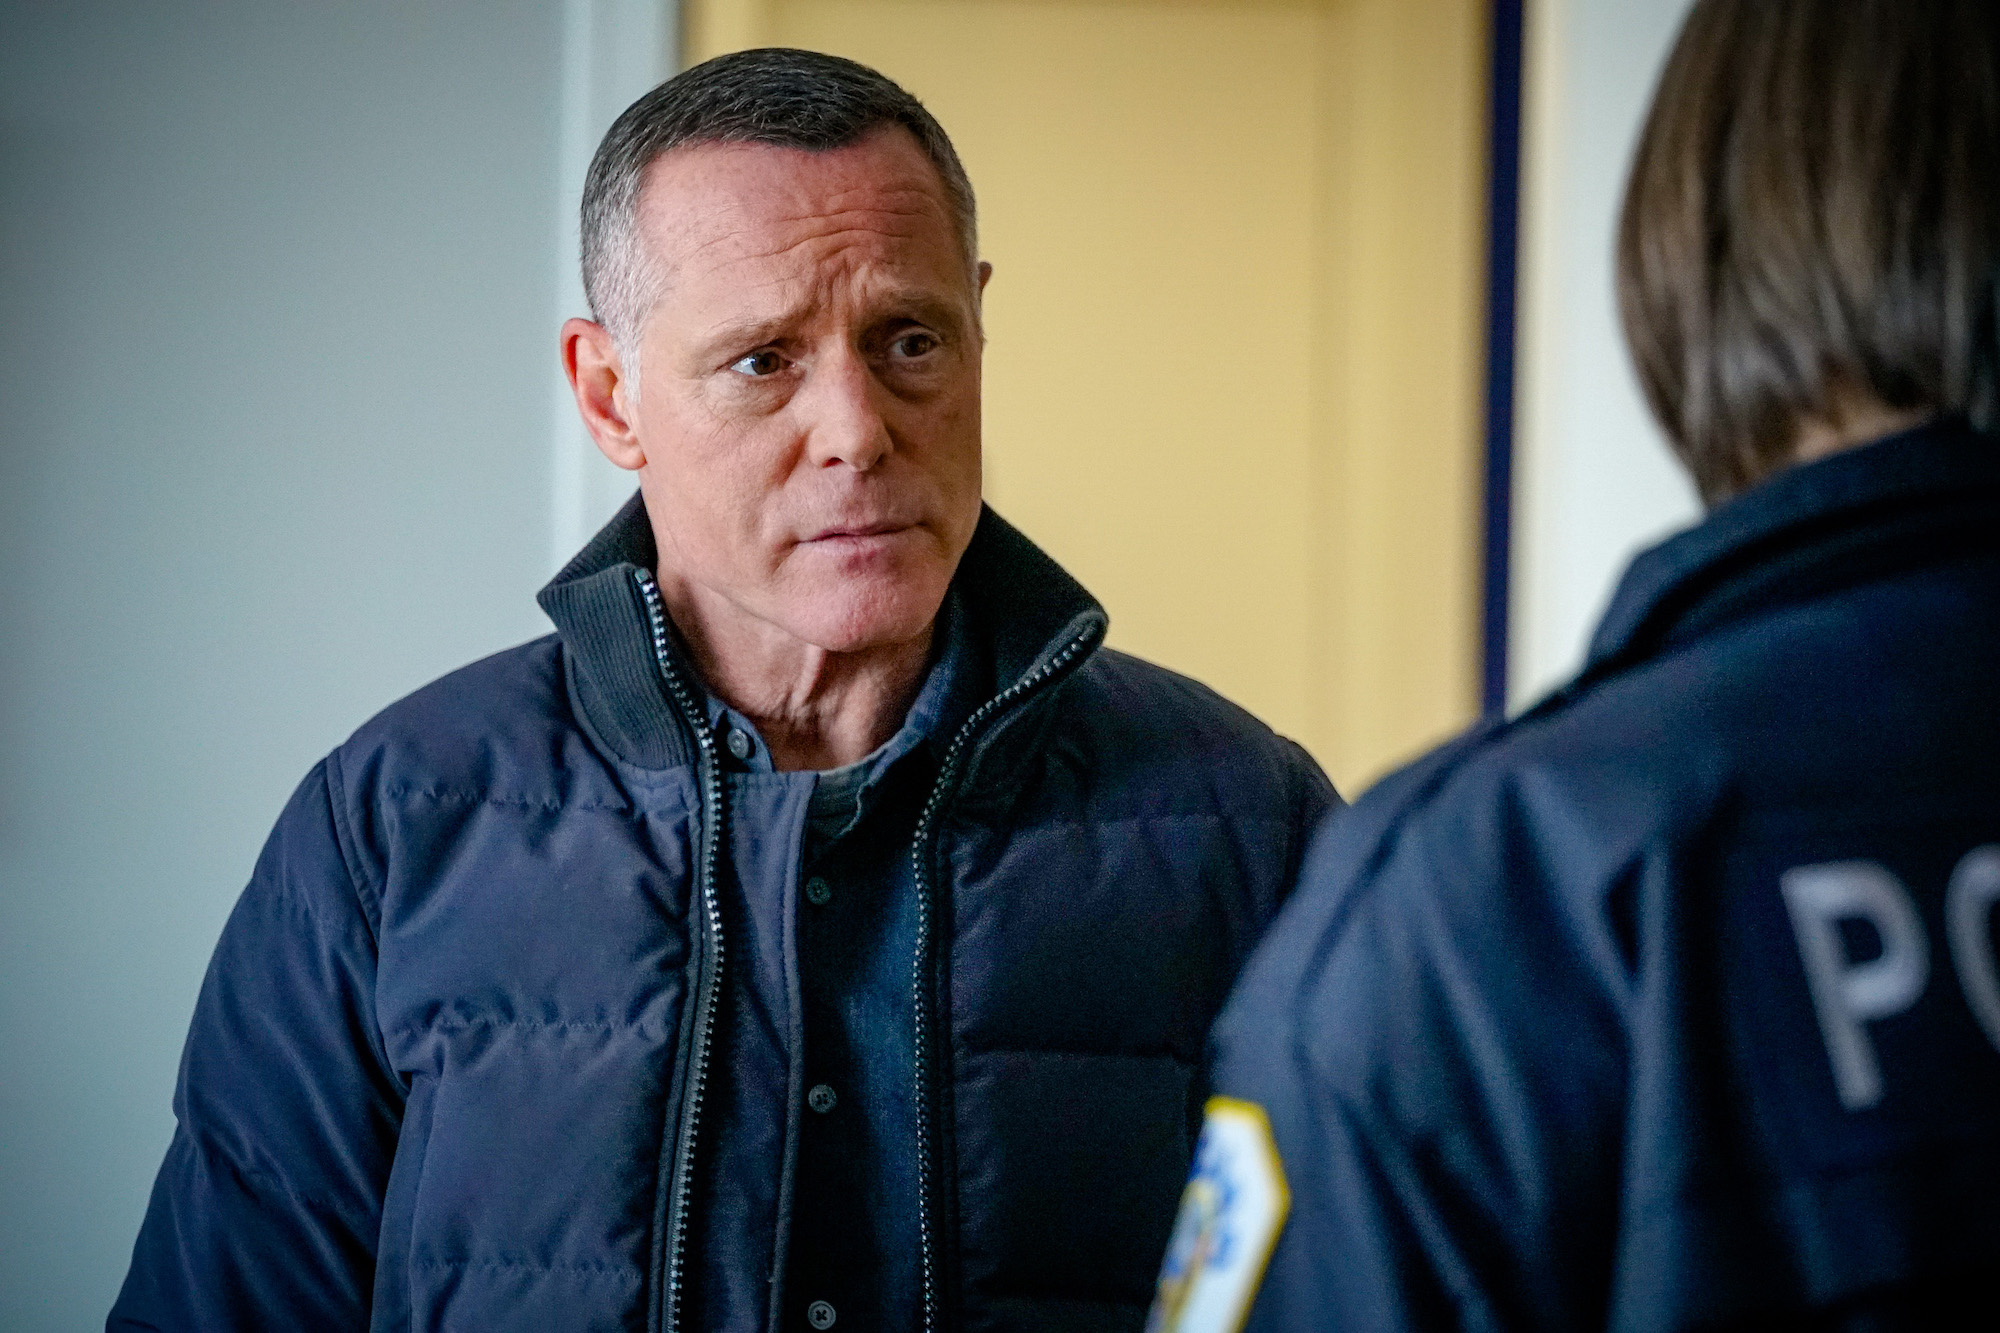 Jason Beghe as Sergeant Hank Voight looking to the side